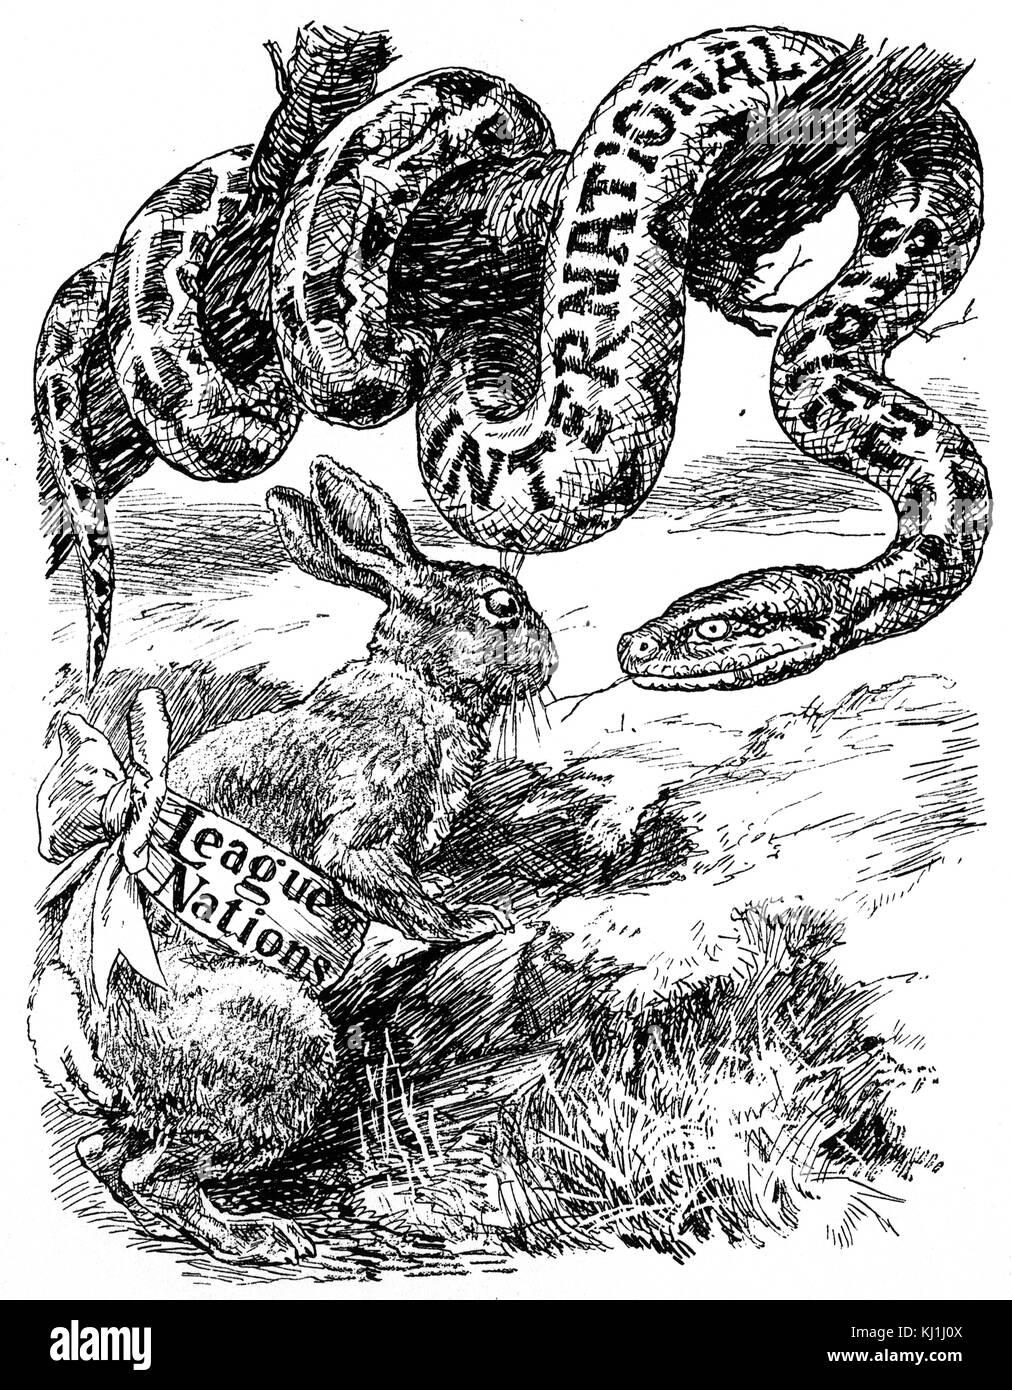 Satirical cartoon about the League of Nations. Dated 20th Century Stock Photo